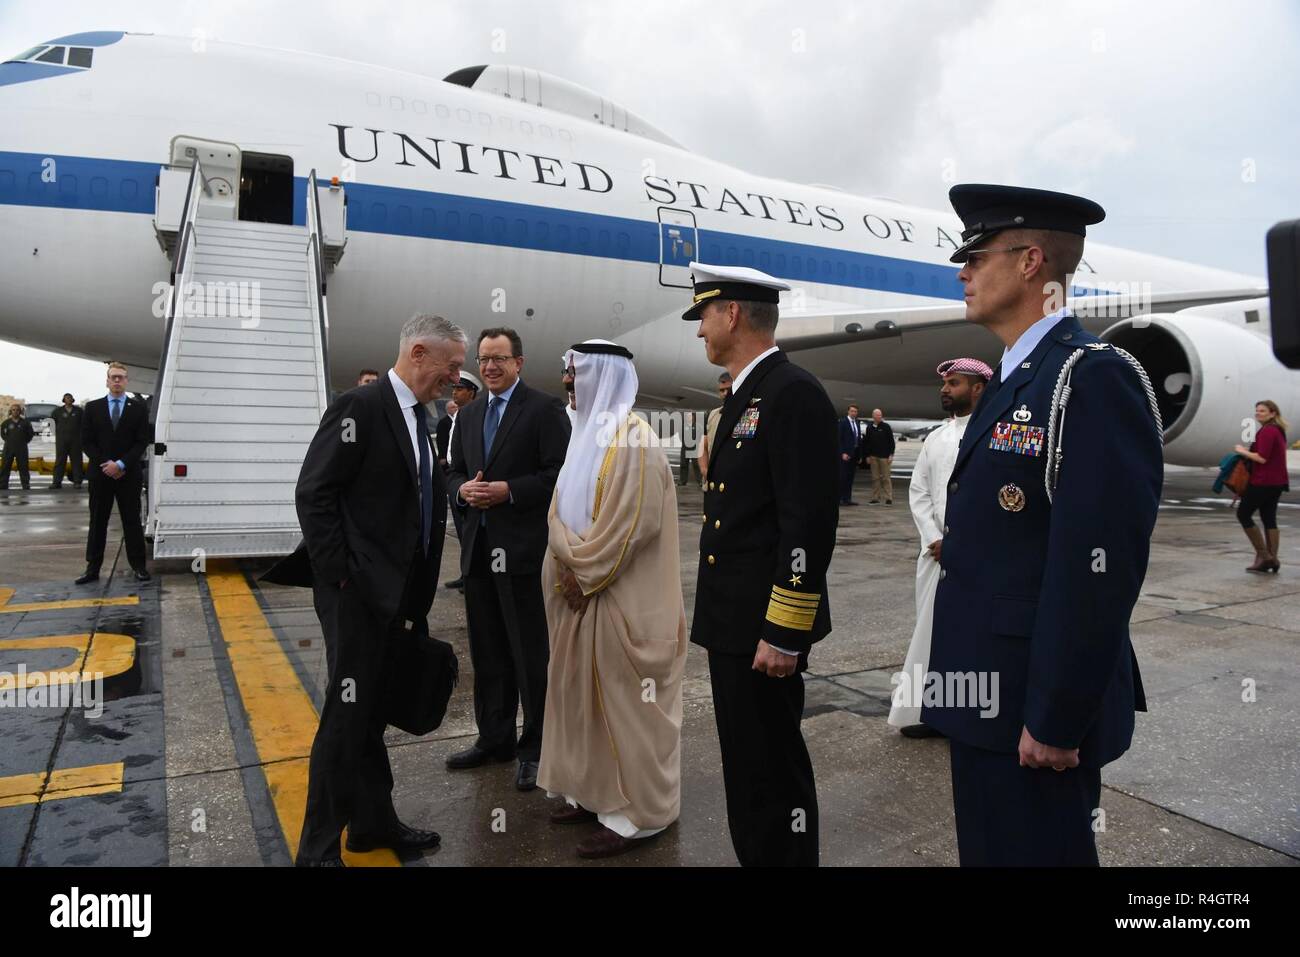 U.S. Secretary of Defense James N. Mattis departs Manama, Bahrain, Oct. 28, 2018. Greeting Mattis at the departure are the U.S. ambassador to Bahrain, Justin Siberell; Bahrain’s Minister of Defense Affairs, Lt. Gen. Shaikh Yousuf bin Ahmed bin Hussain Al Jalahma; Navy Vice Adm. Scott Stearney, commander, U.S. Naval Forces Central Command and 5th Fleet/Combined Maritime Forces; and Air Force Col. David Wallin, U.S. Senior Defense Official / Defense Attaché to Bahrain. (DOD Stock Photo